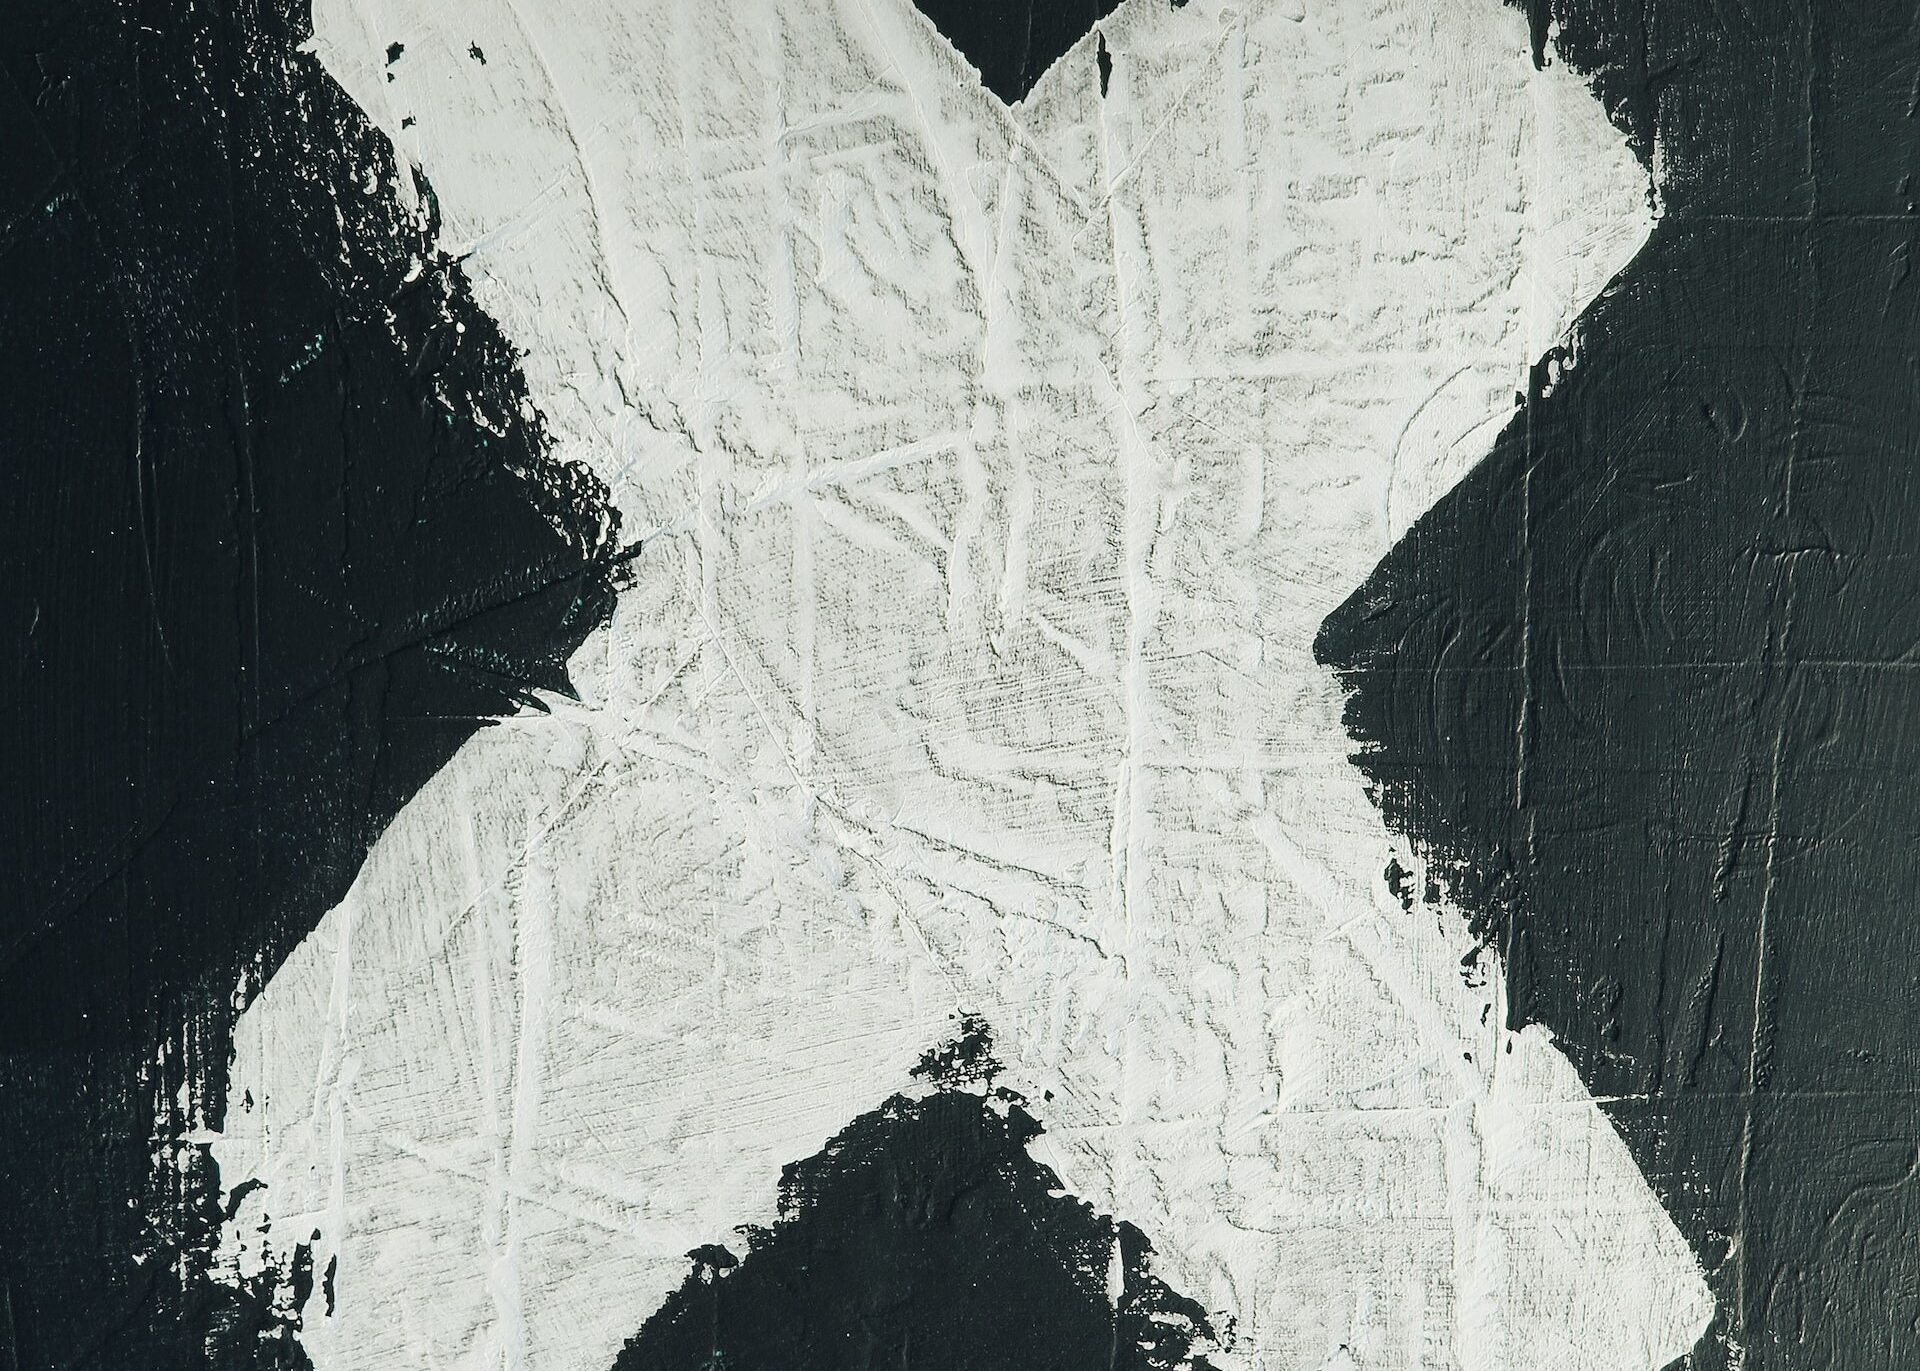 A white letter "X" painted on a black wall